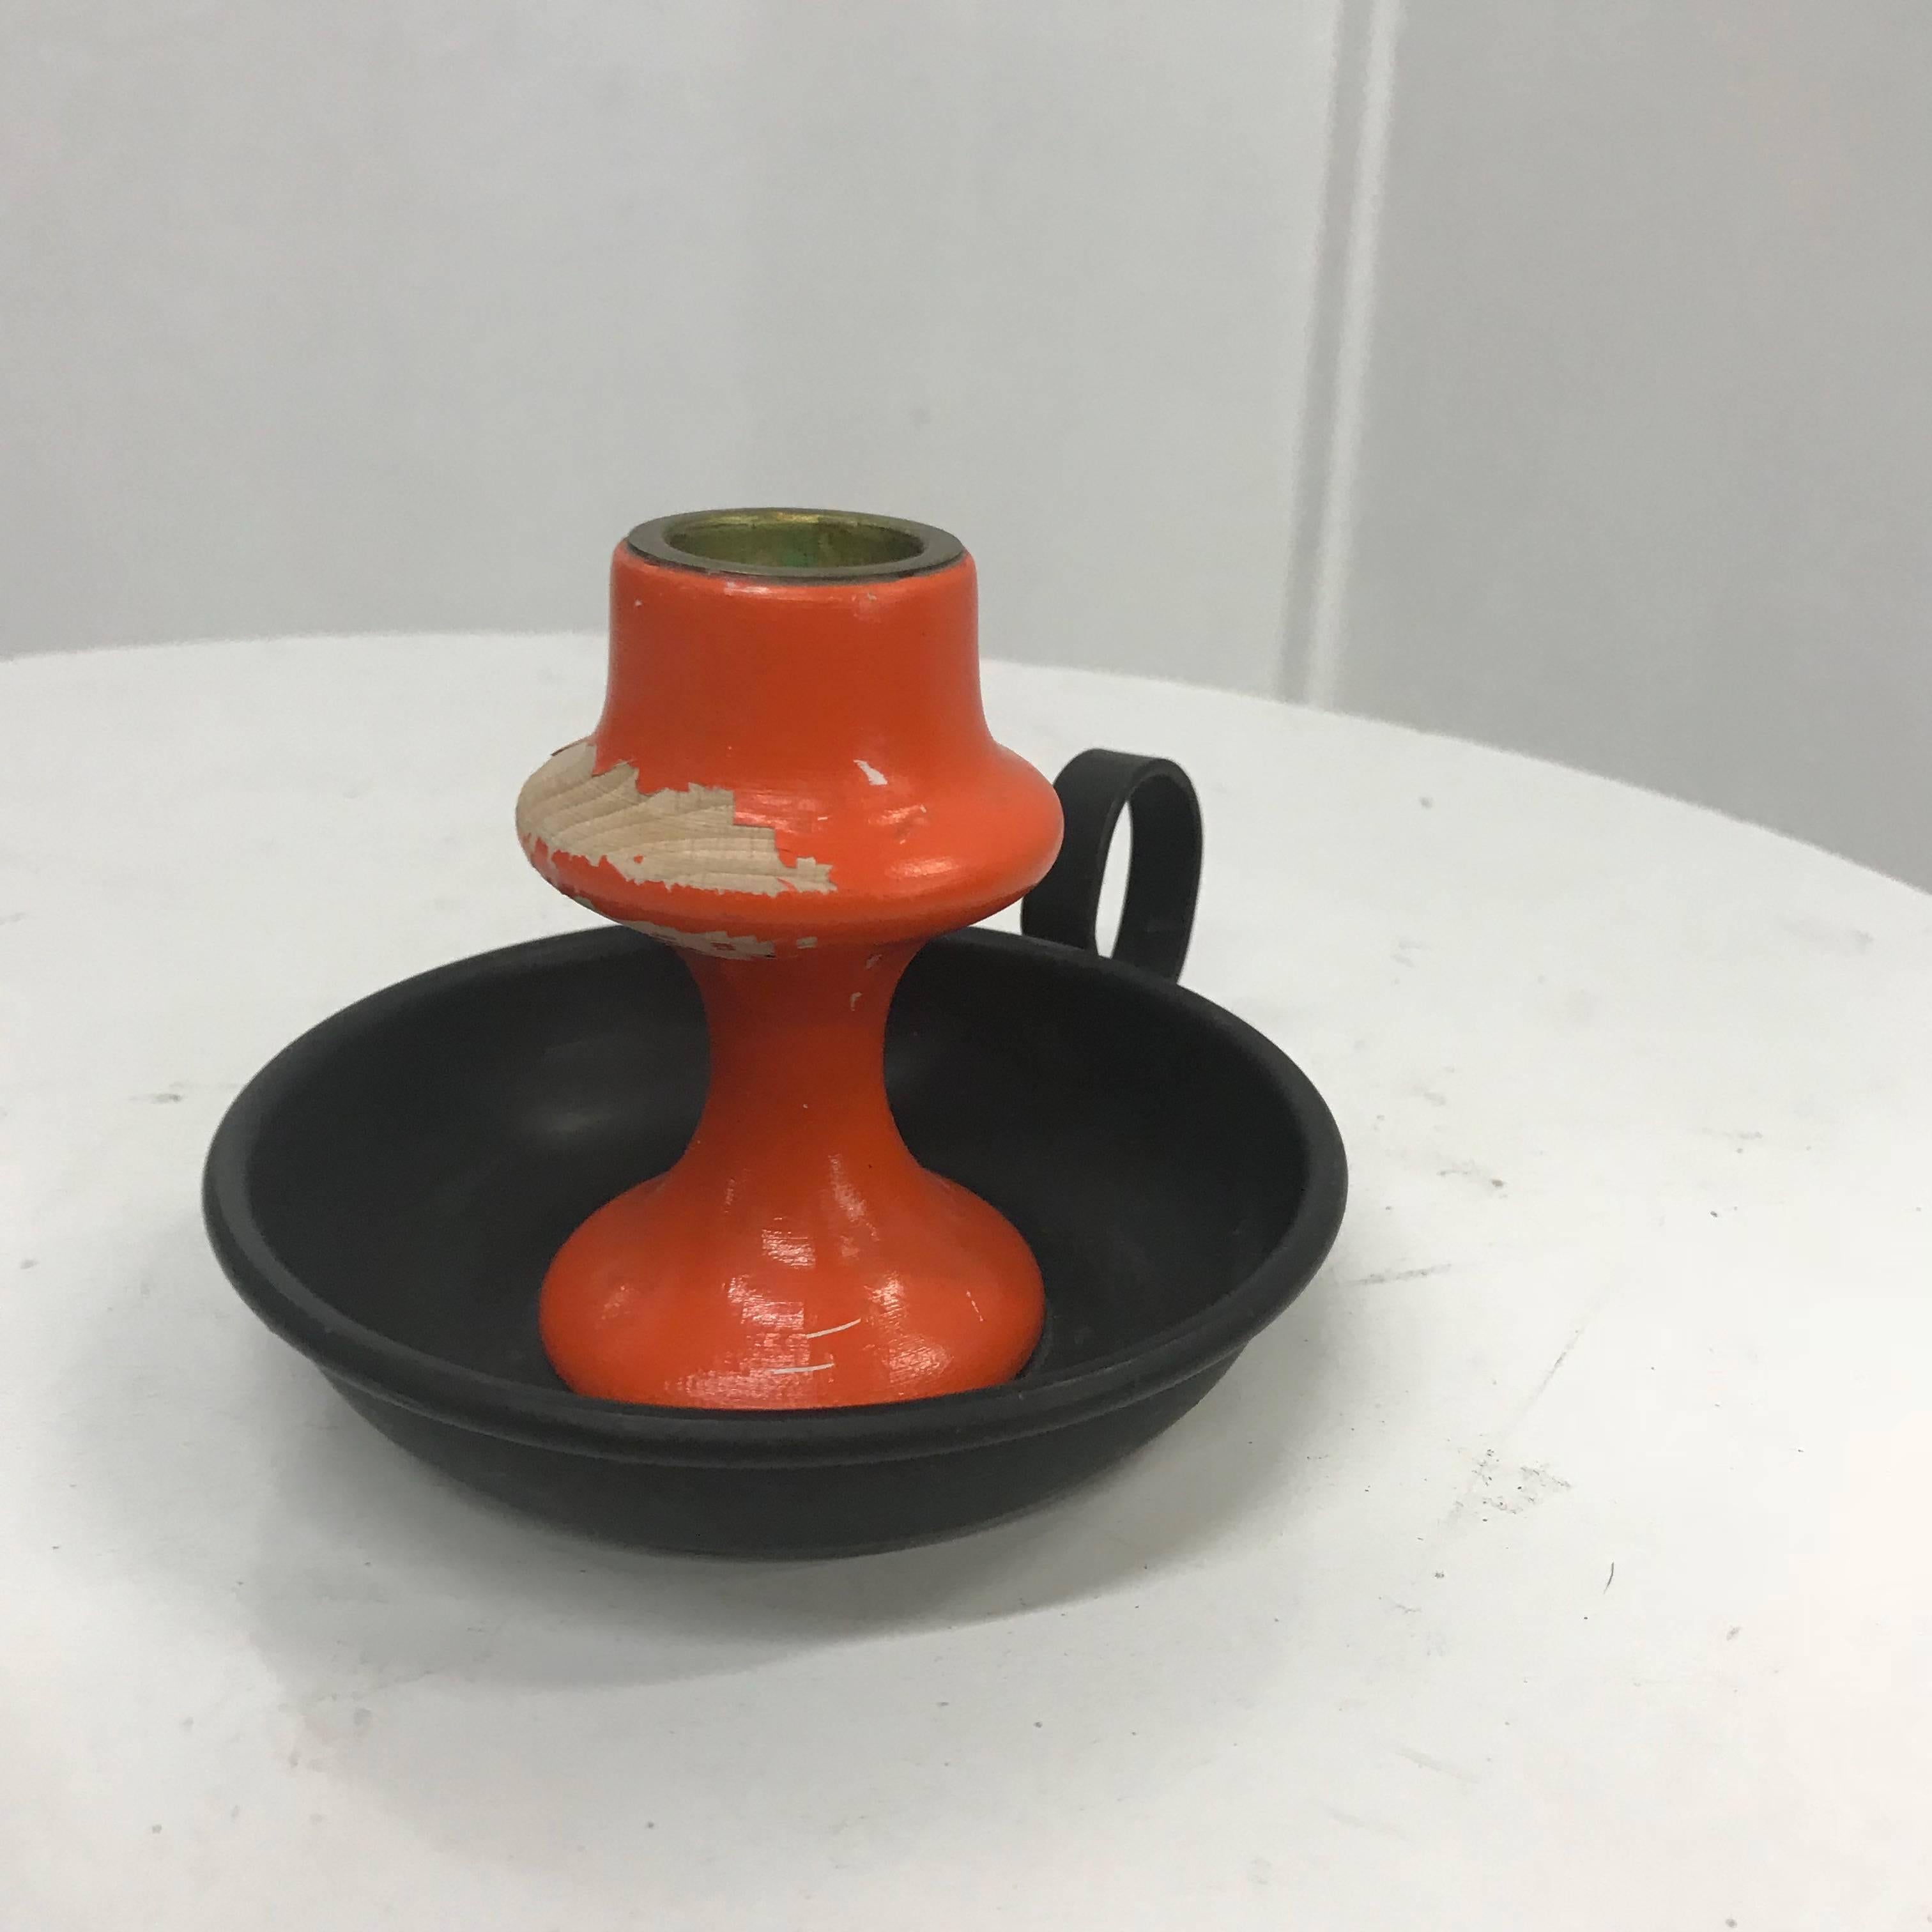 For your consideration a vintage candle holder. 
Made in Denmark. Wood painted in orange with the original metal base.
Stamped with makers label underneath.
Dimensions: 3